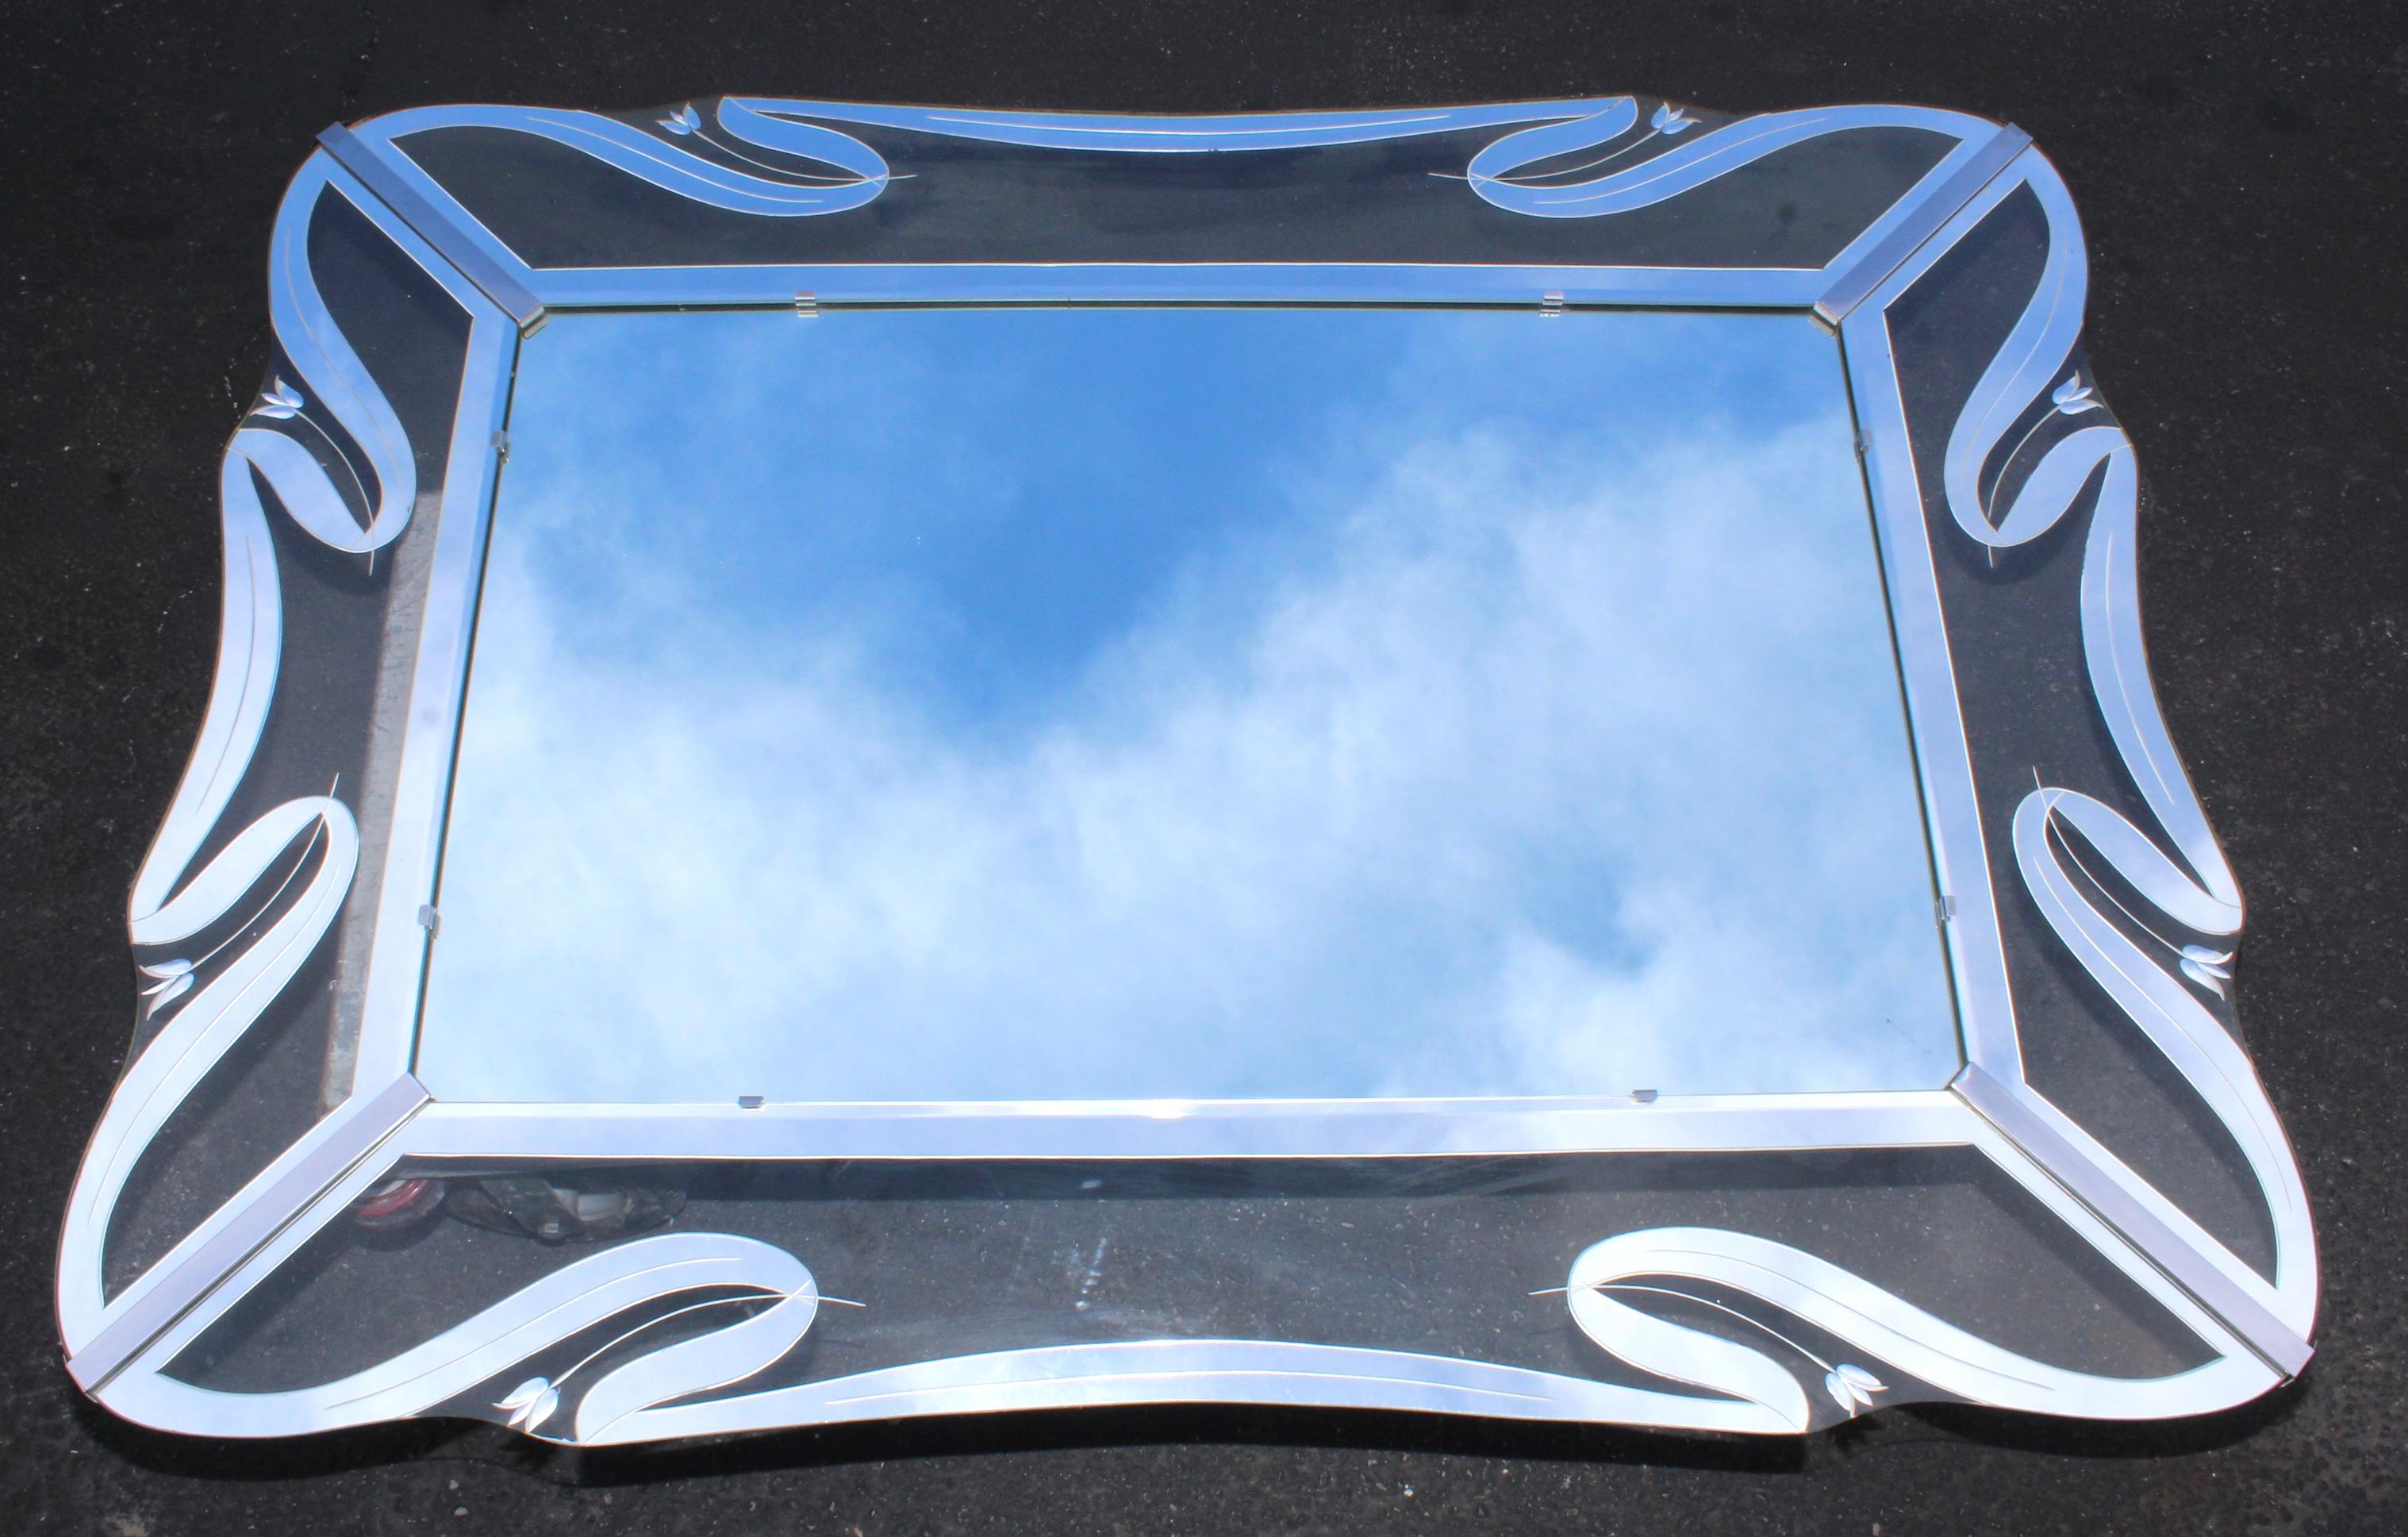 Stunning 1950s Mid-Century Modern, clear and mirror etched glass frame mirror with chrome hardware.